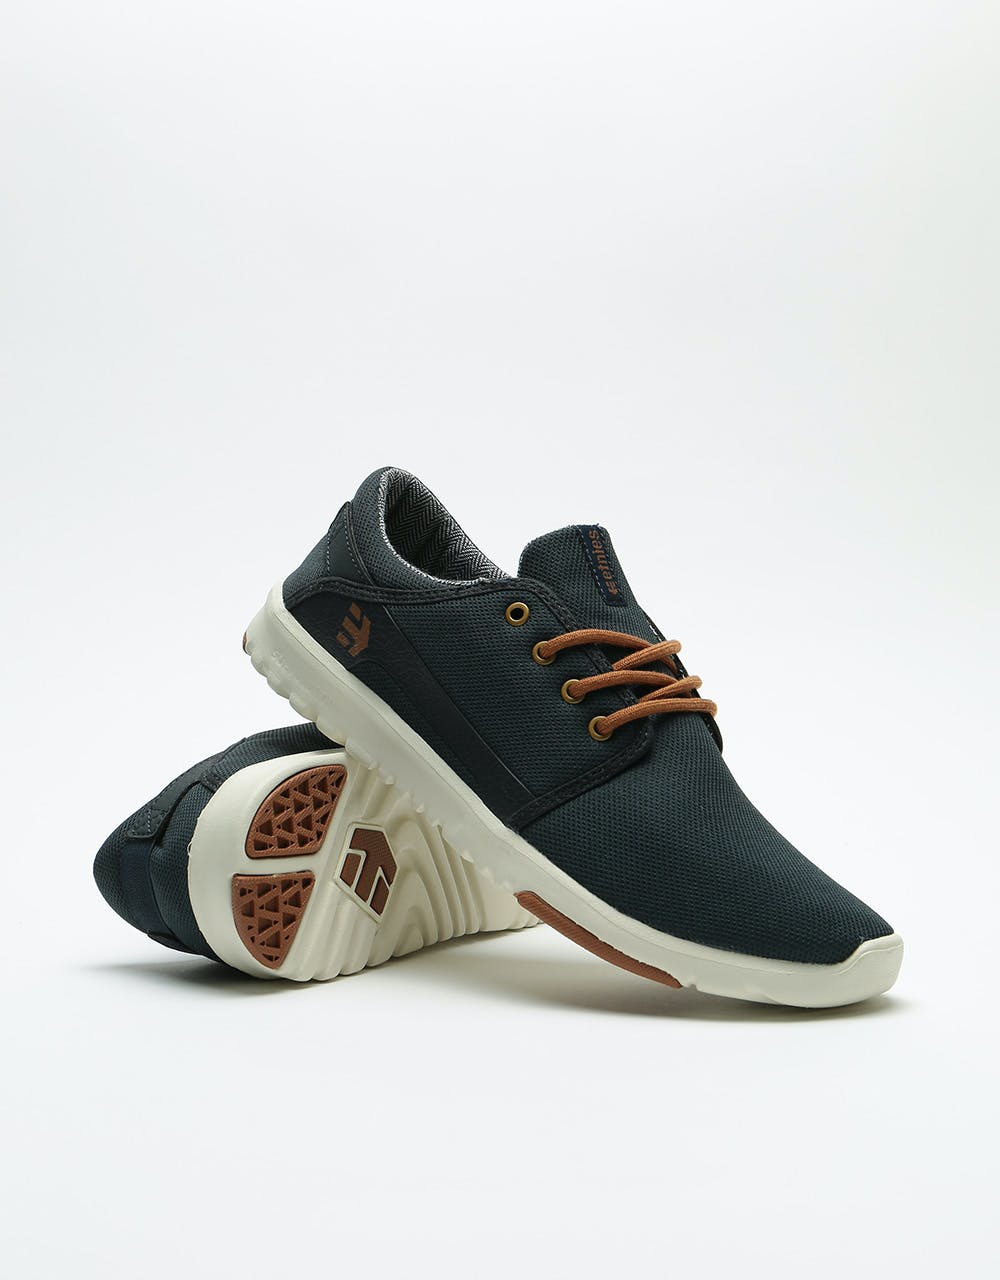 Etnies Scout Skate Shoes - Navy/Gold